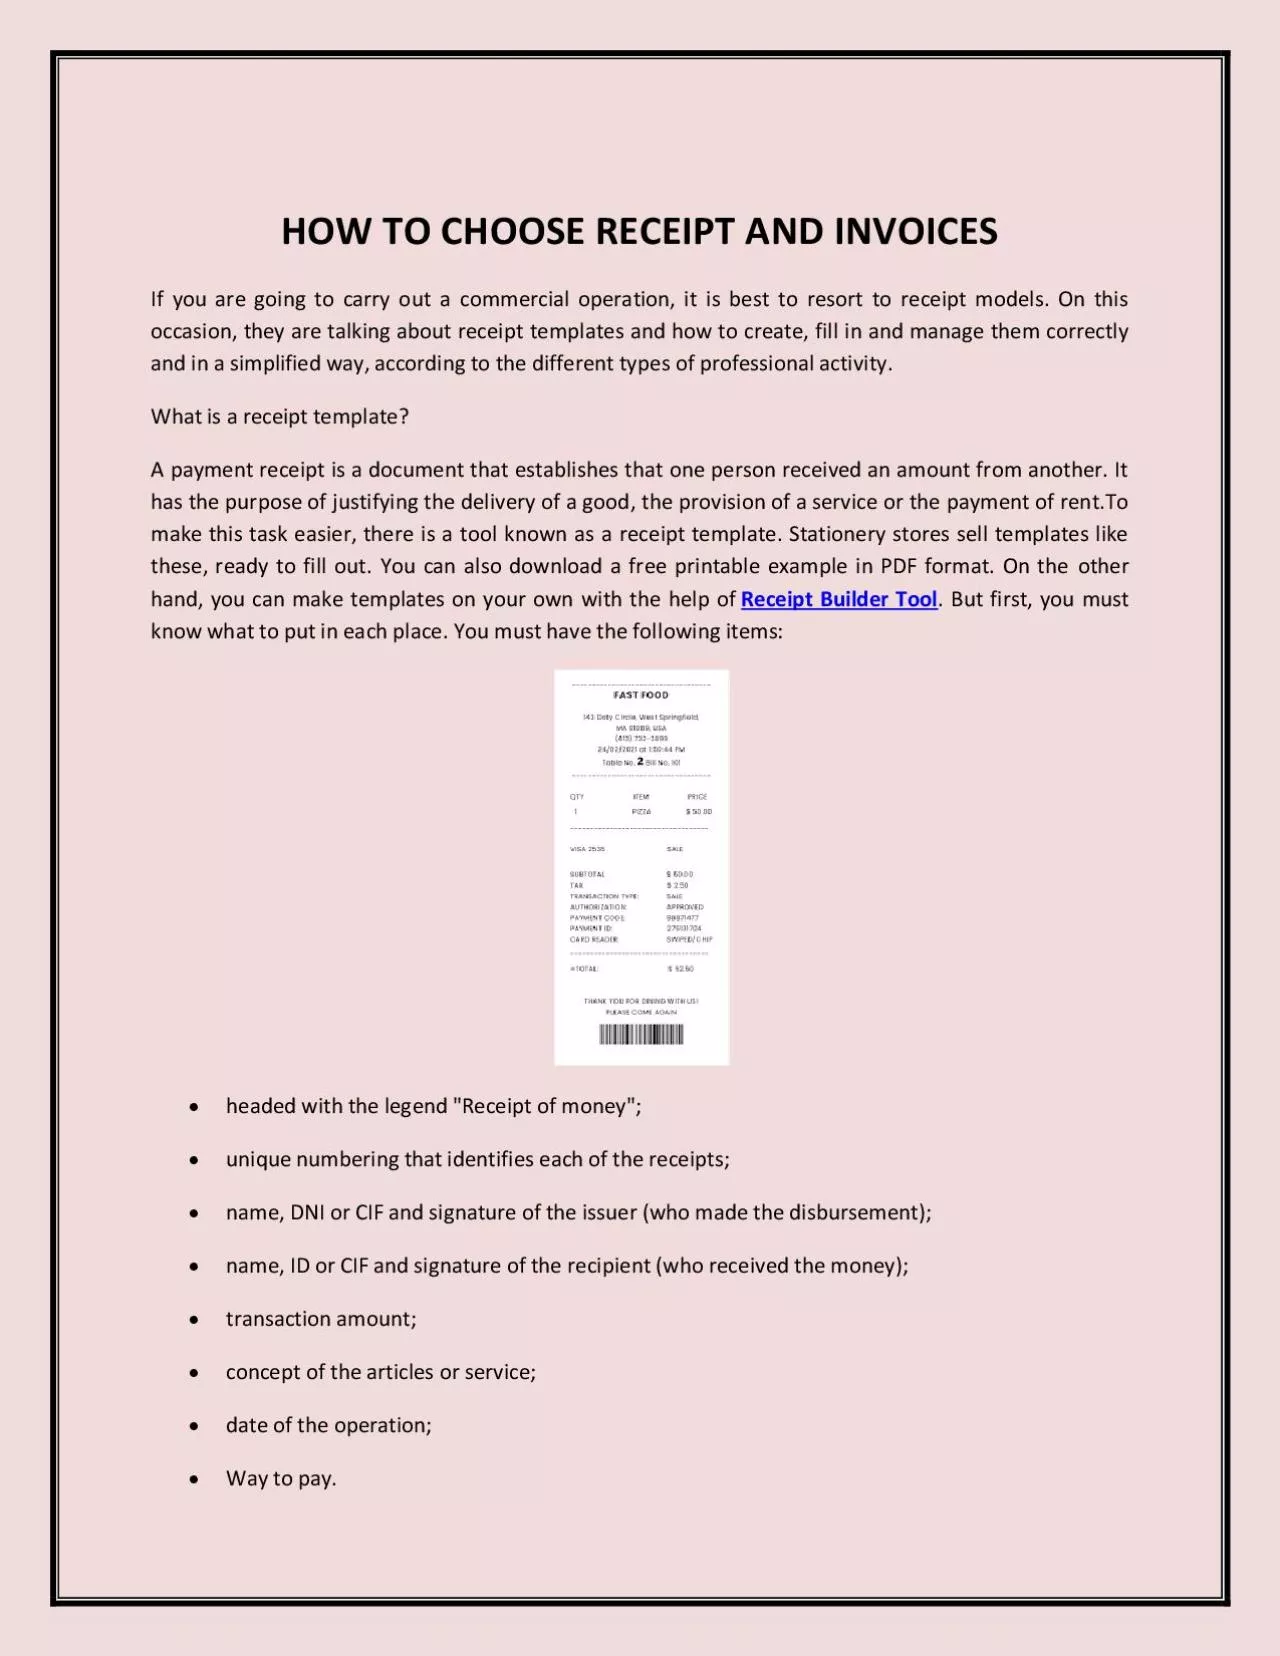 HOW TO CHOOSE RECEIPT AND INVOICES